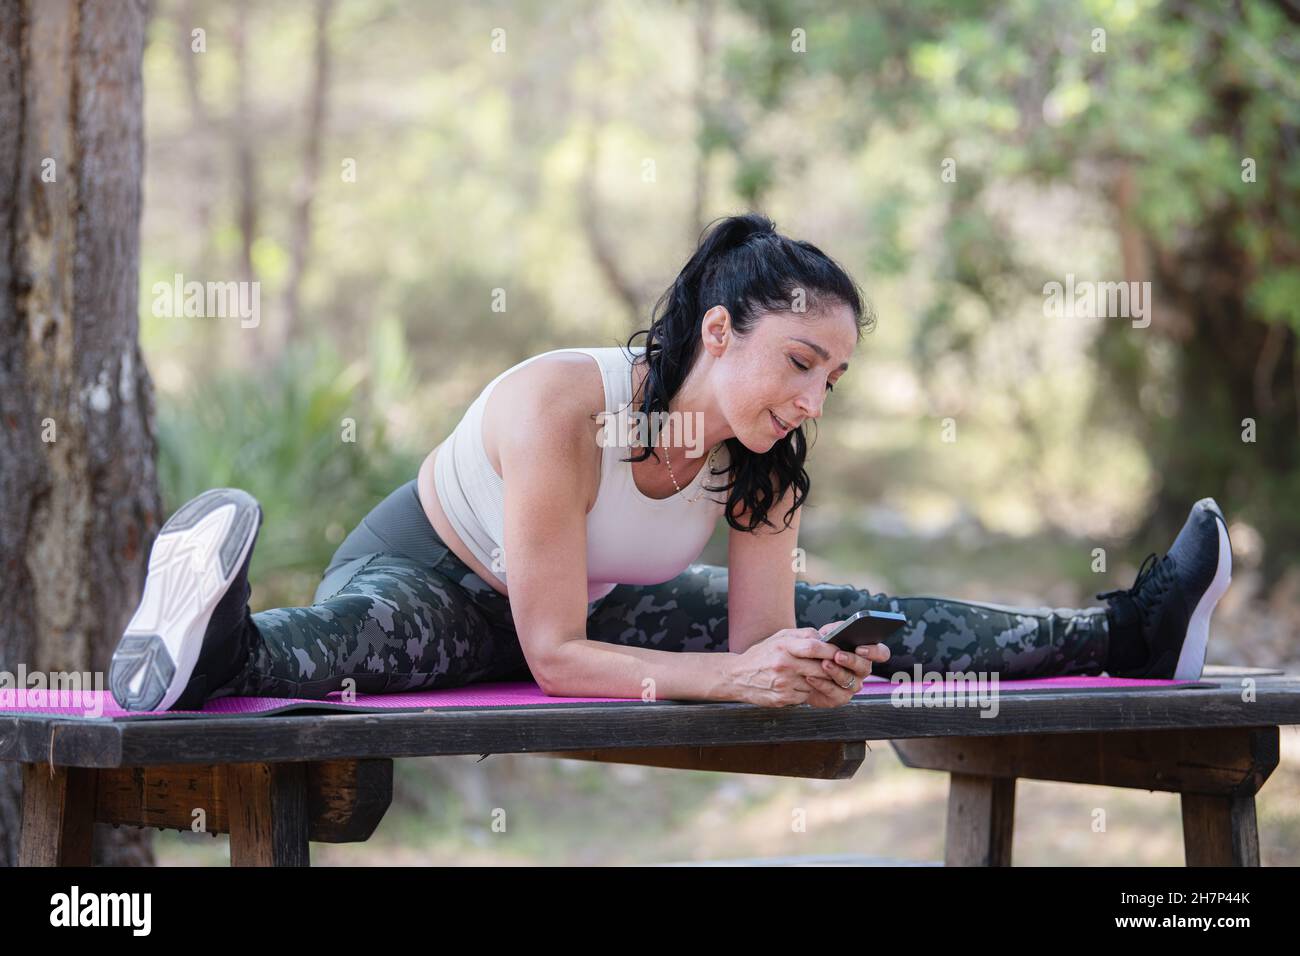 Caucasian adult woman sitting with open legs flexibility posing on picnic table using her phone Stock Photo